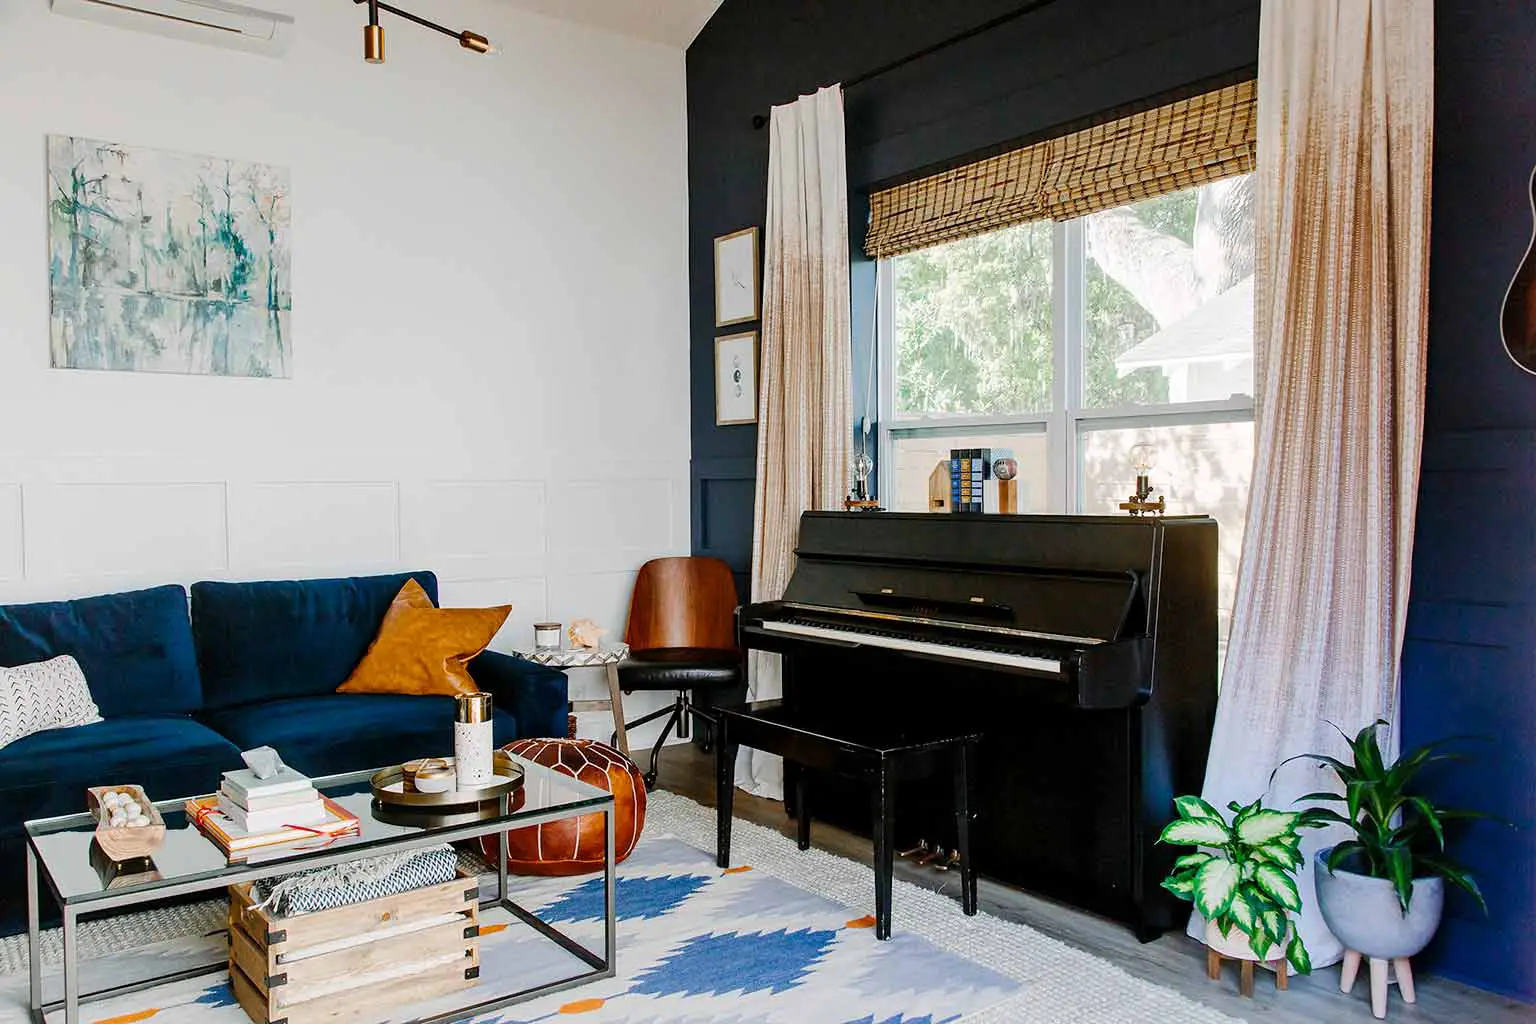 Mid-century modern guest house with a boho/eclectic twist - The Guest House Reveal - That Homebird Life Blog